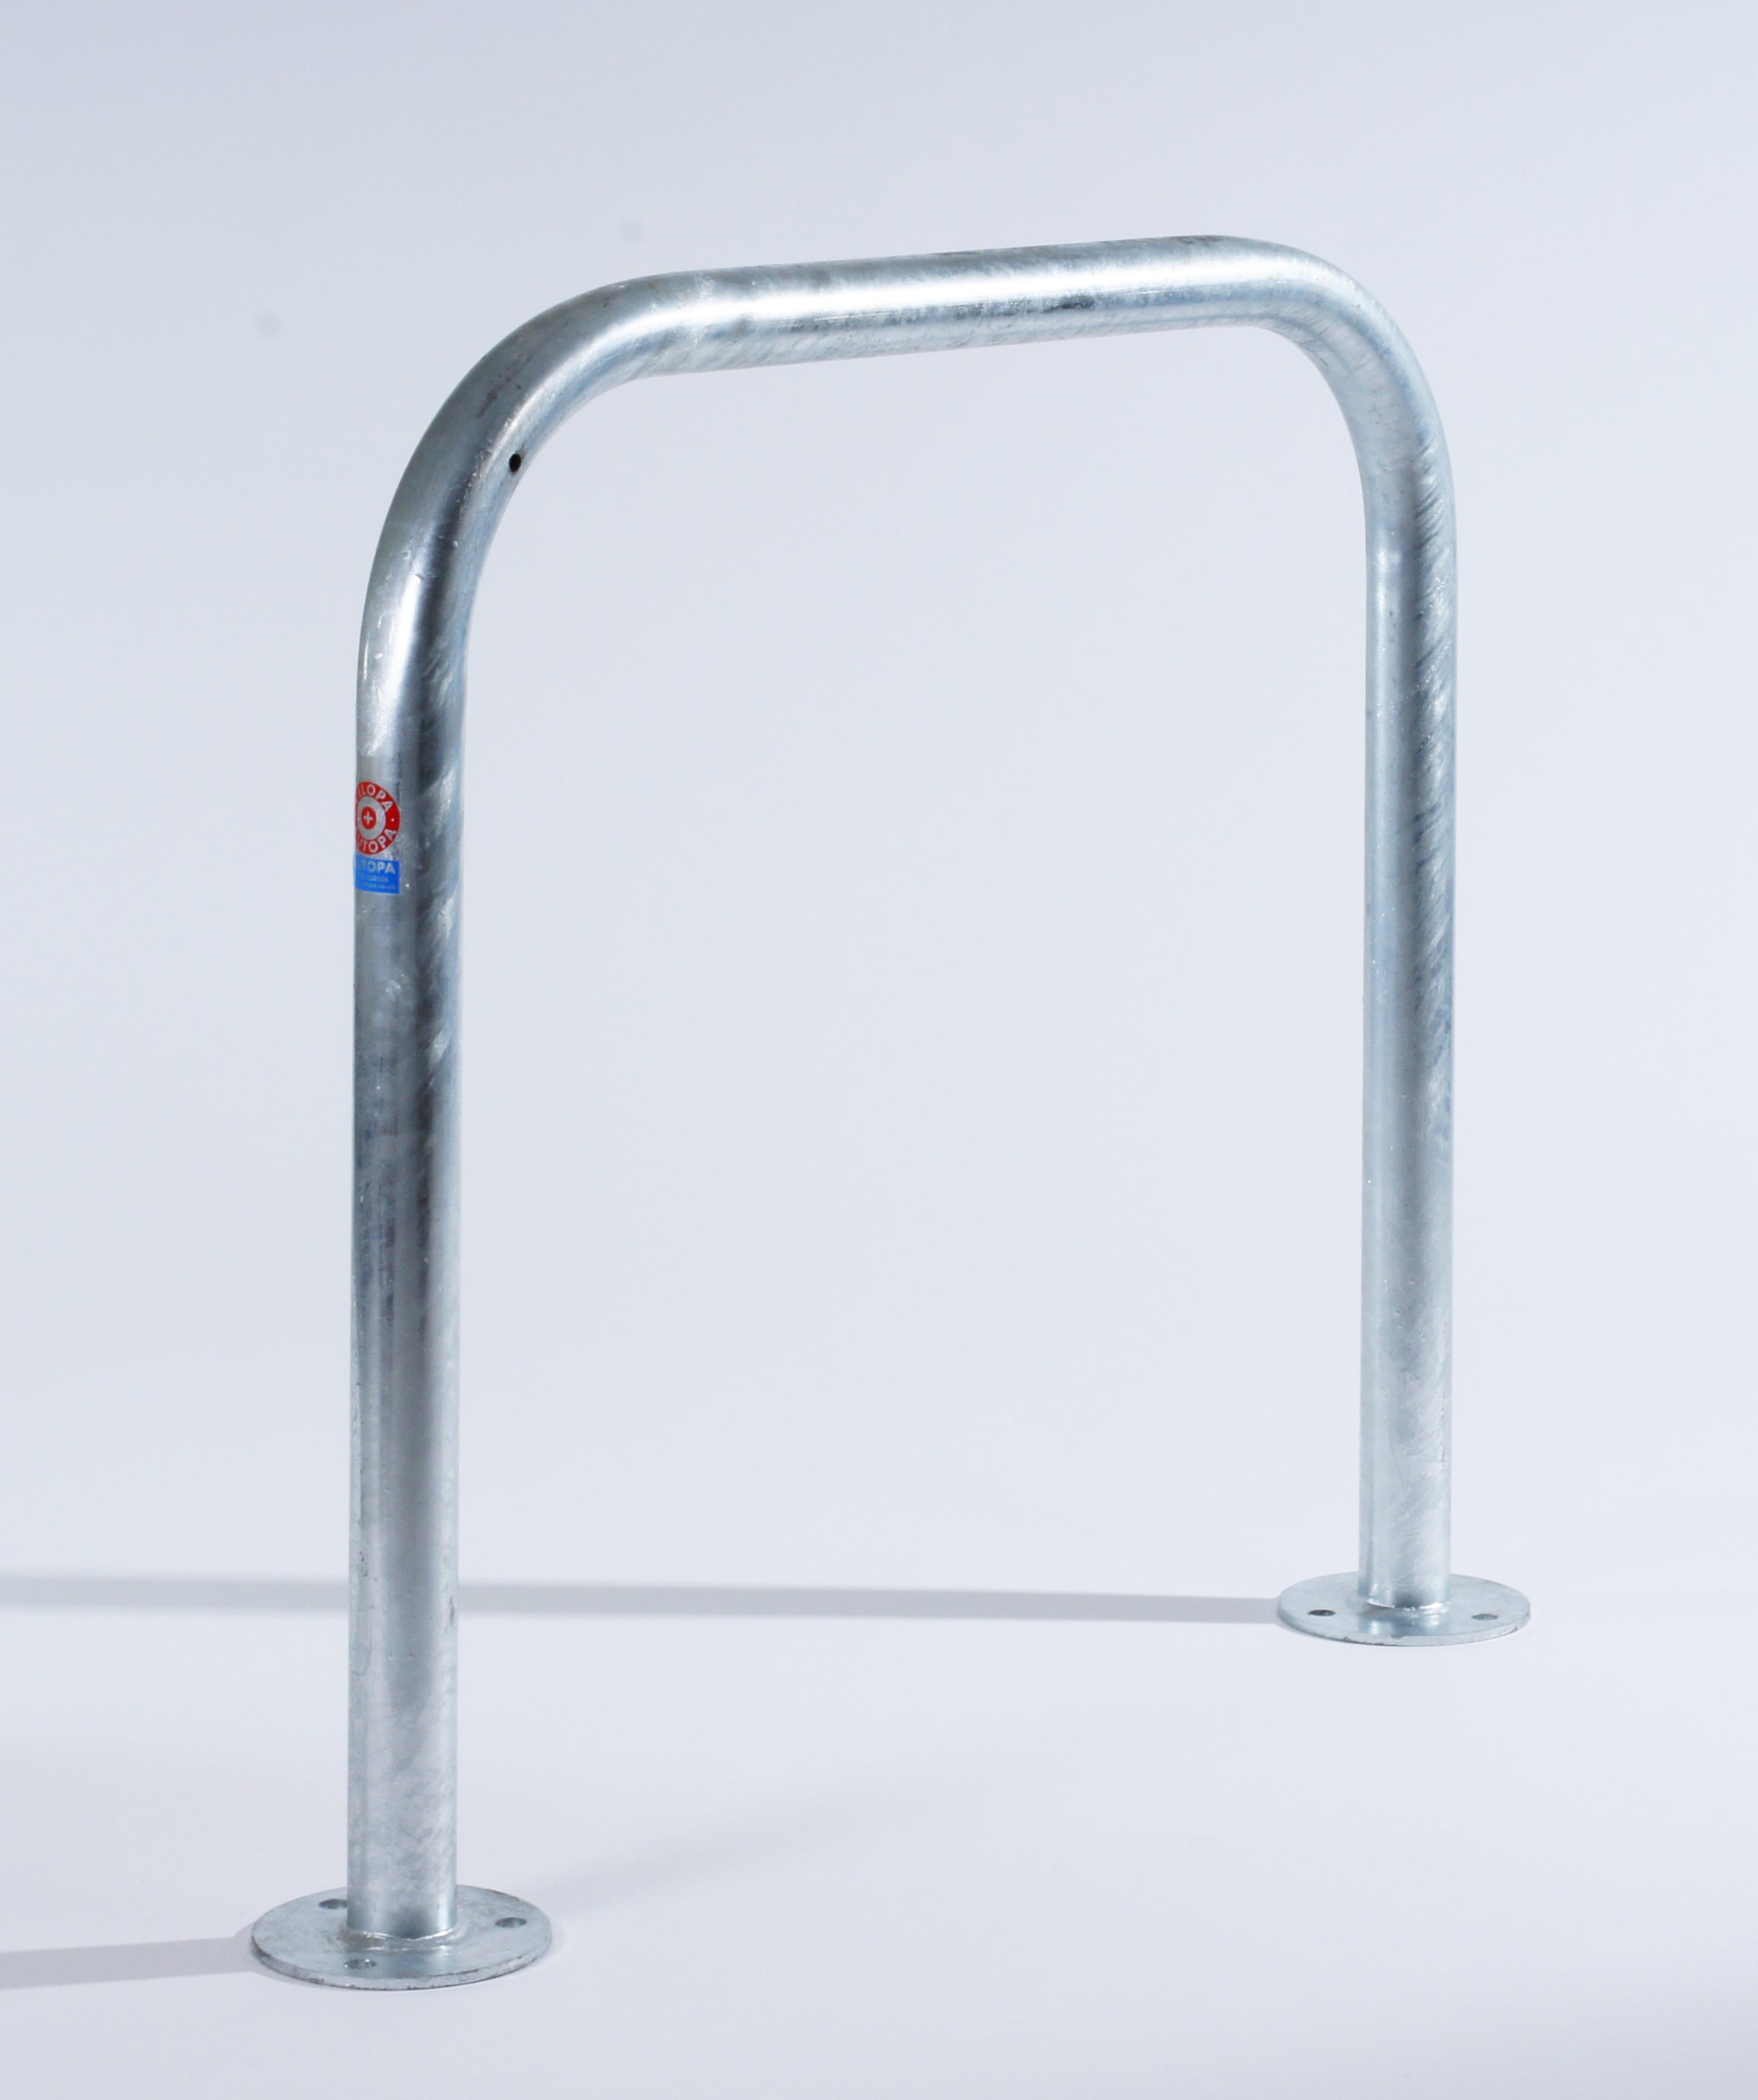 48mm Dia. Sheffield Cycle Stand